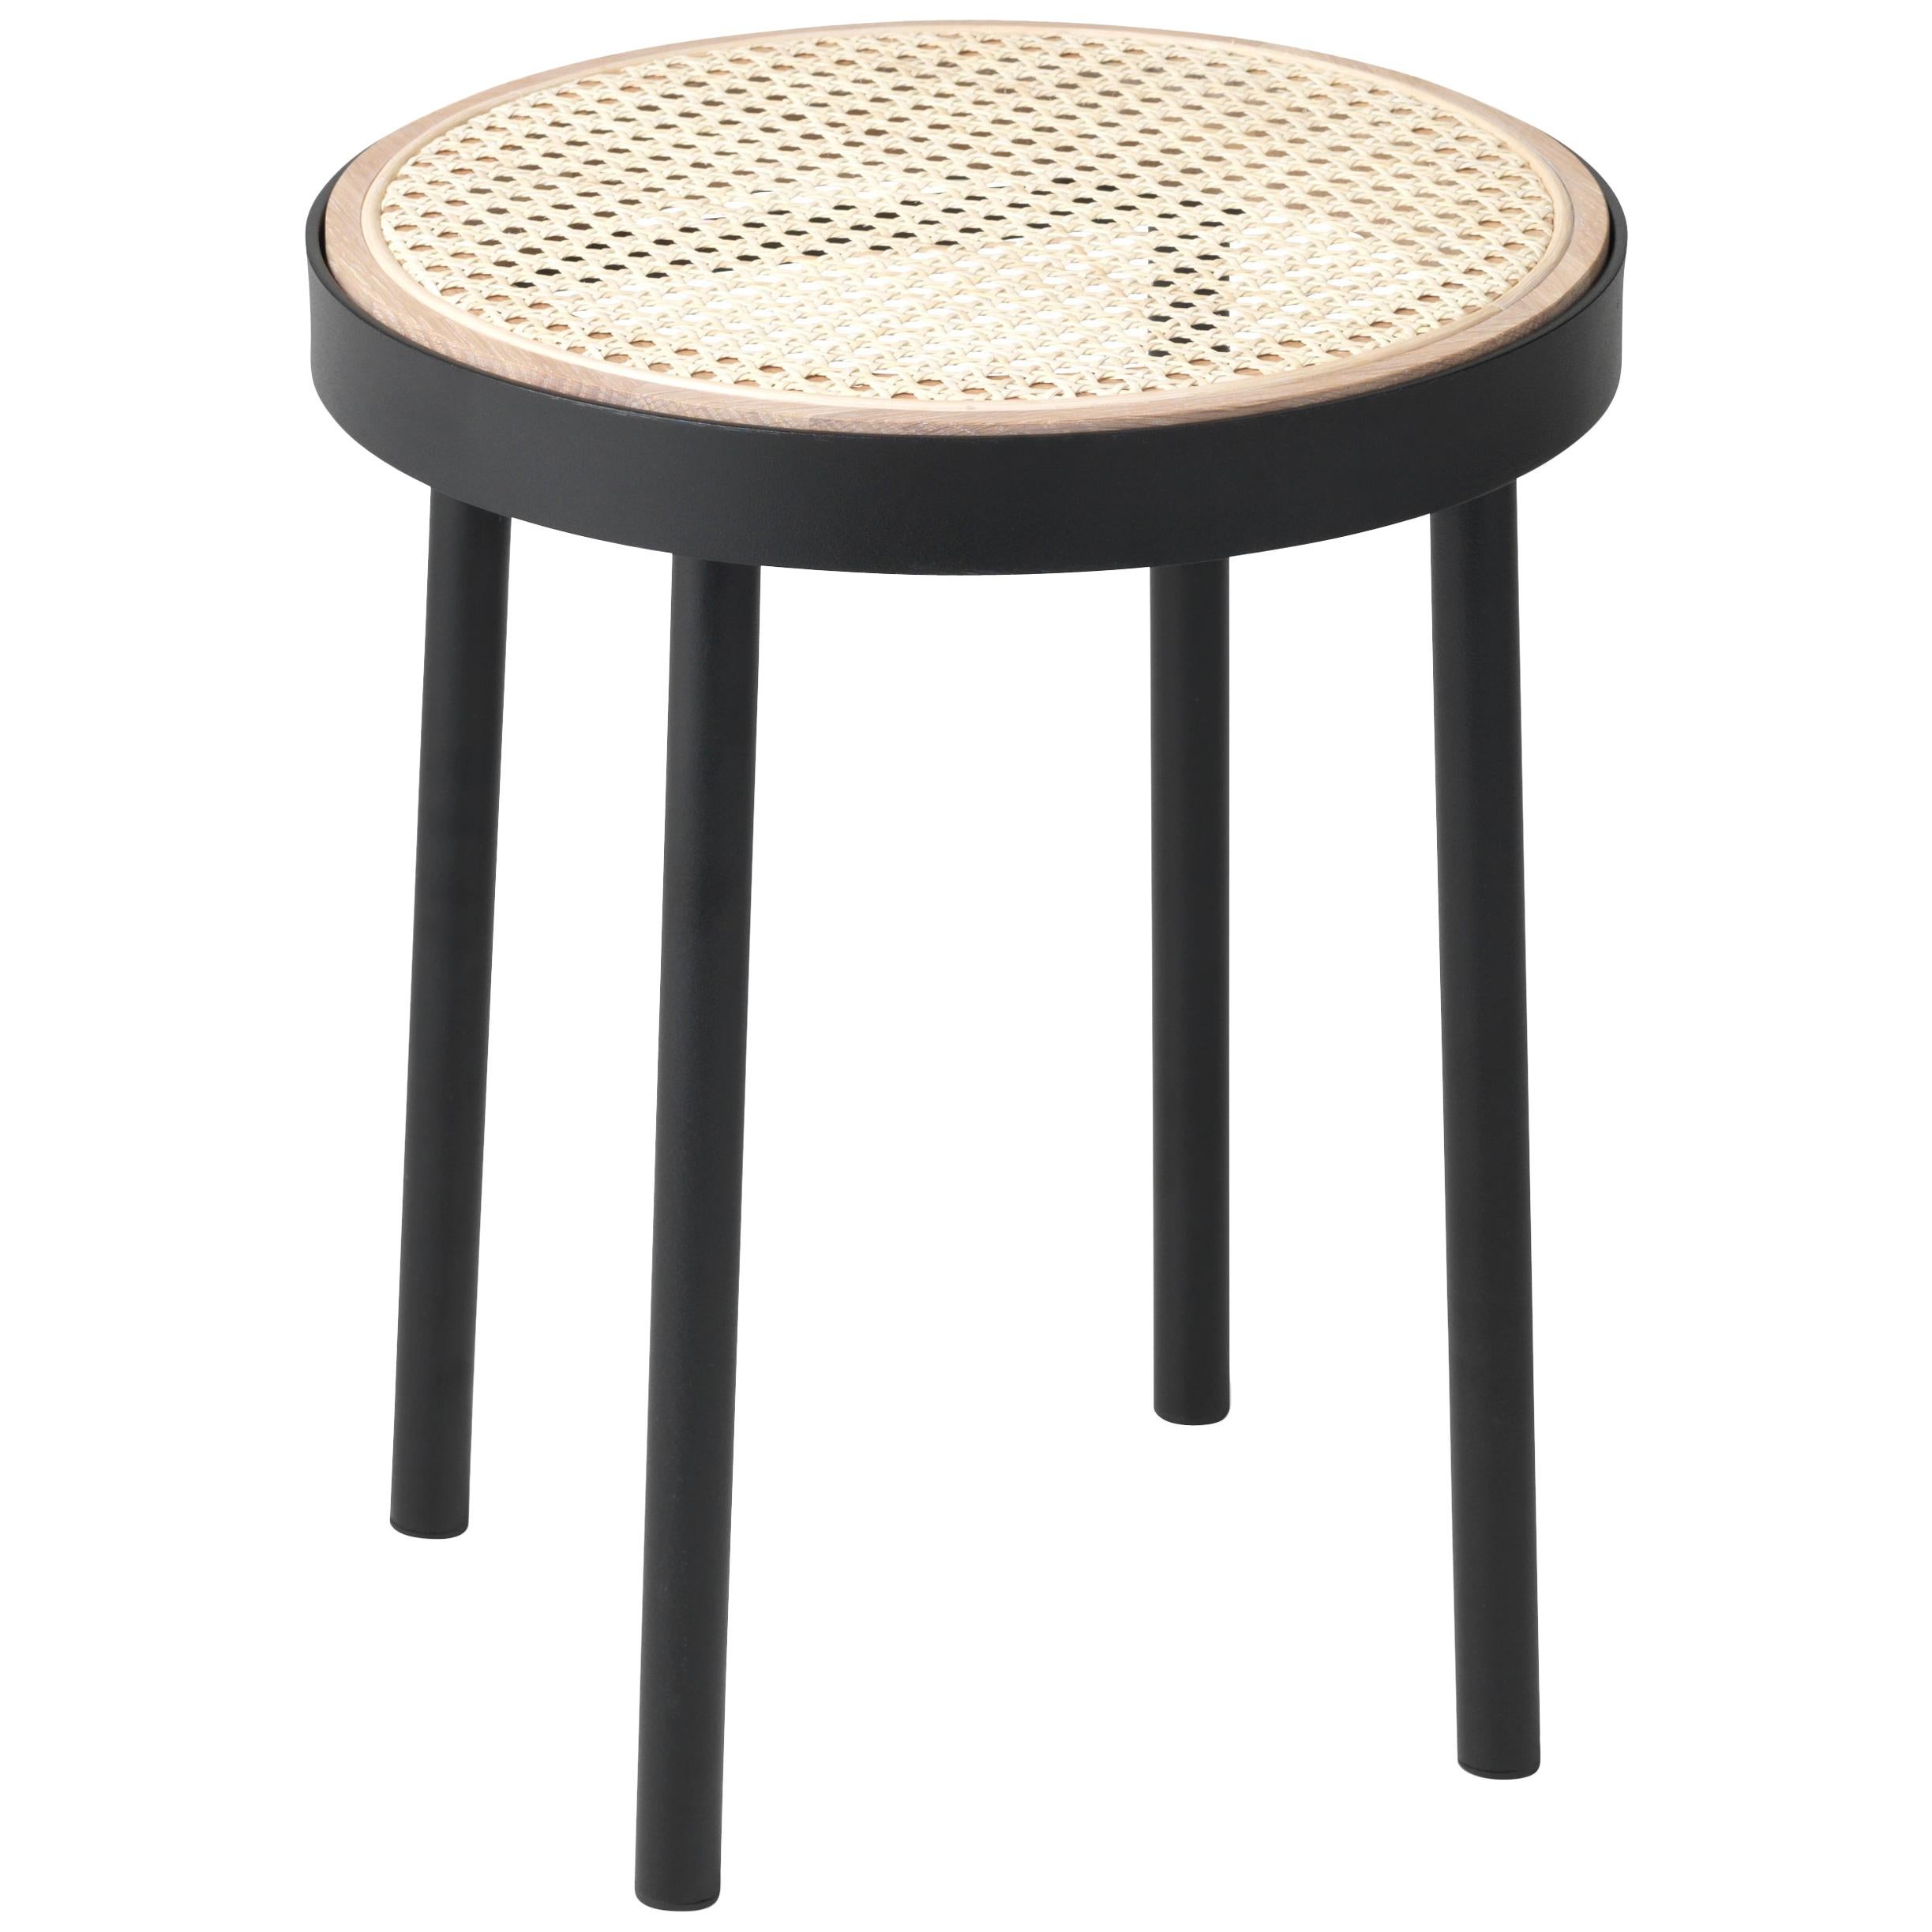 Be My Guest Cane Stool by Charlotte Høncke for Warm Nordic For Sale